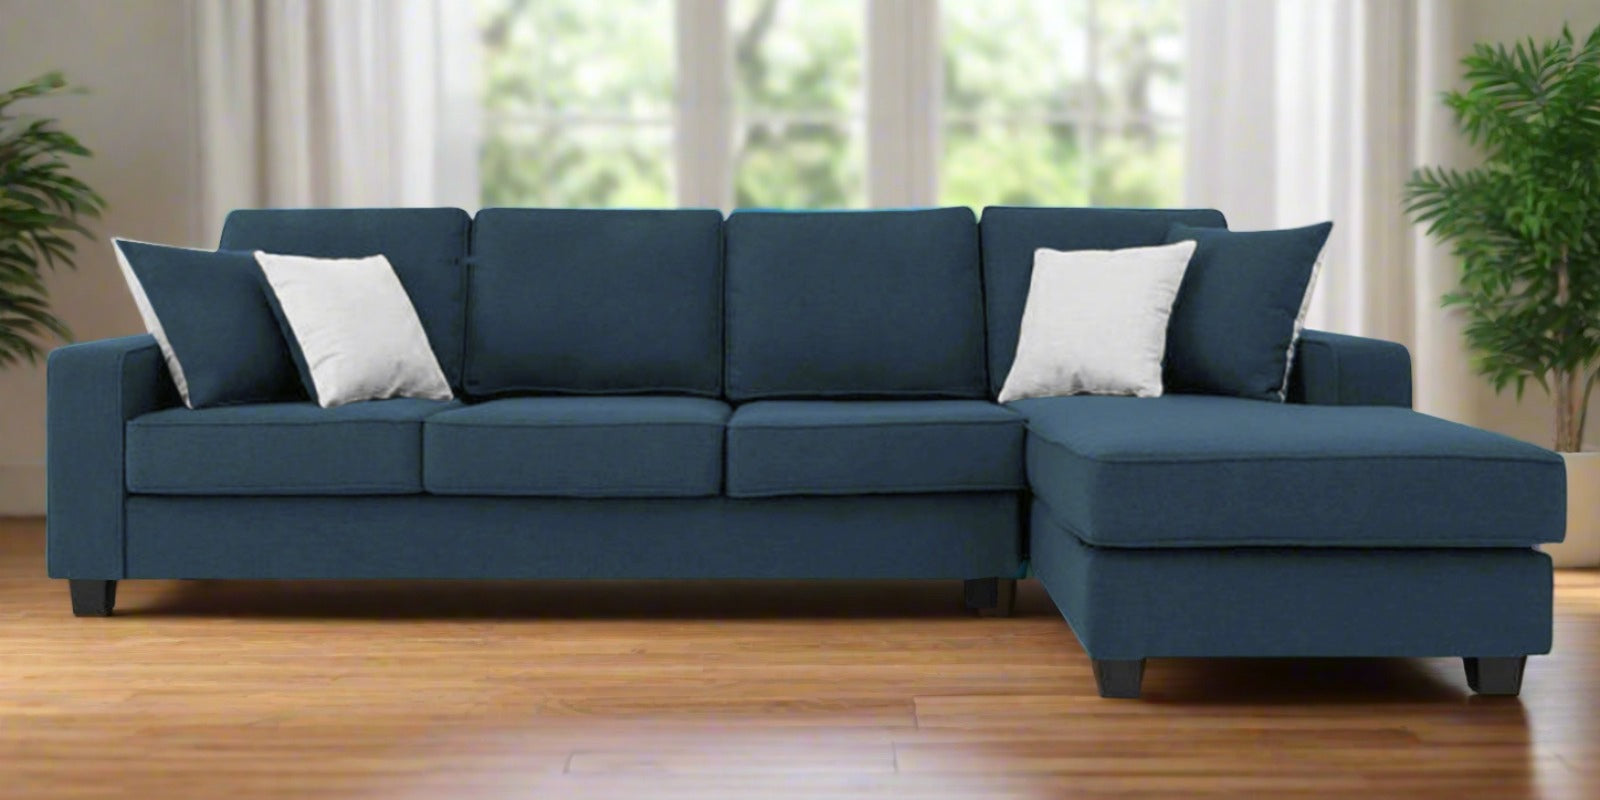 Ladybug Fabric LHS Sectional Sofa (3+Lounger) In Light Blue Colour